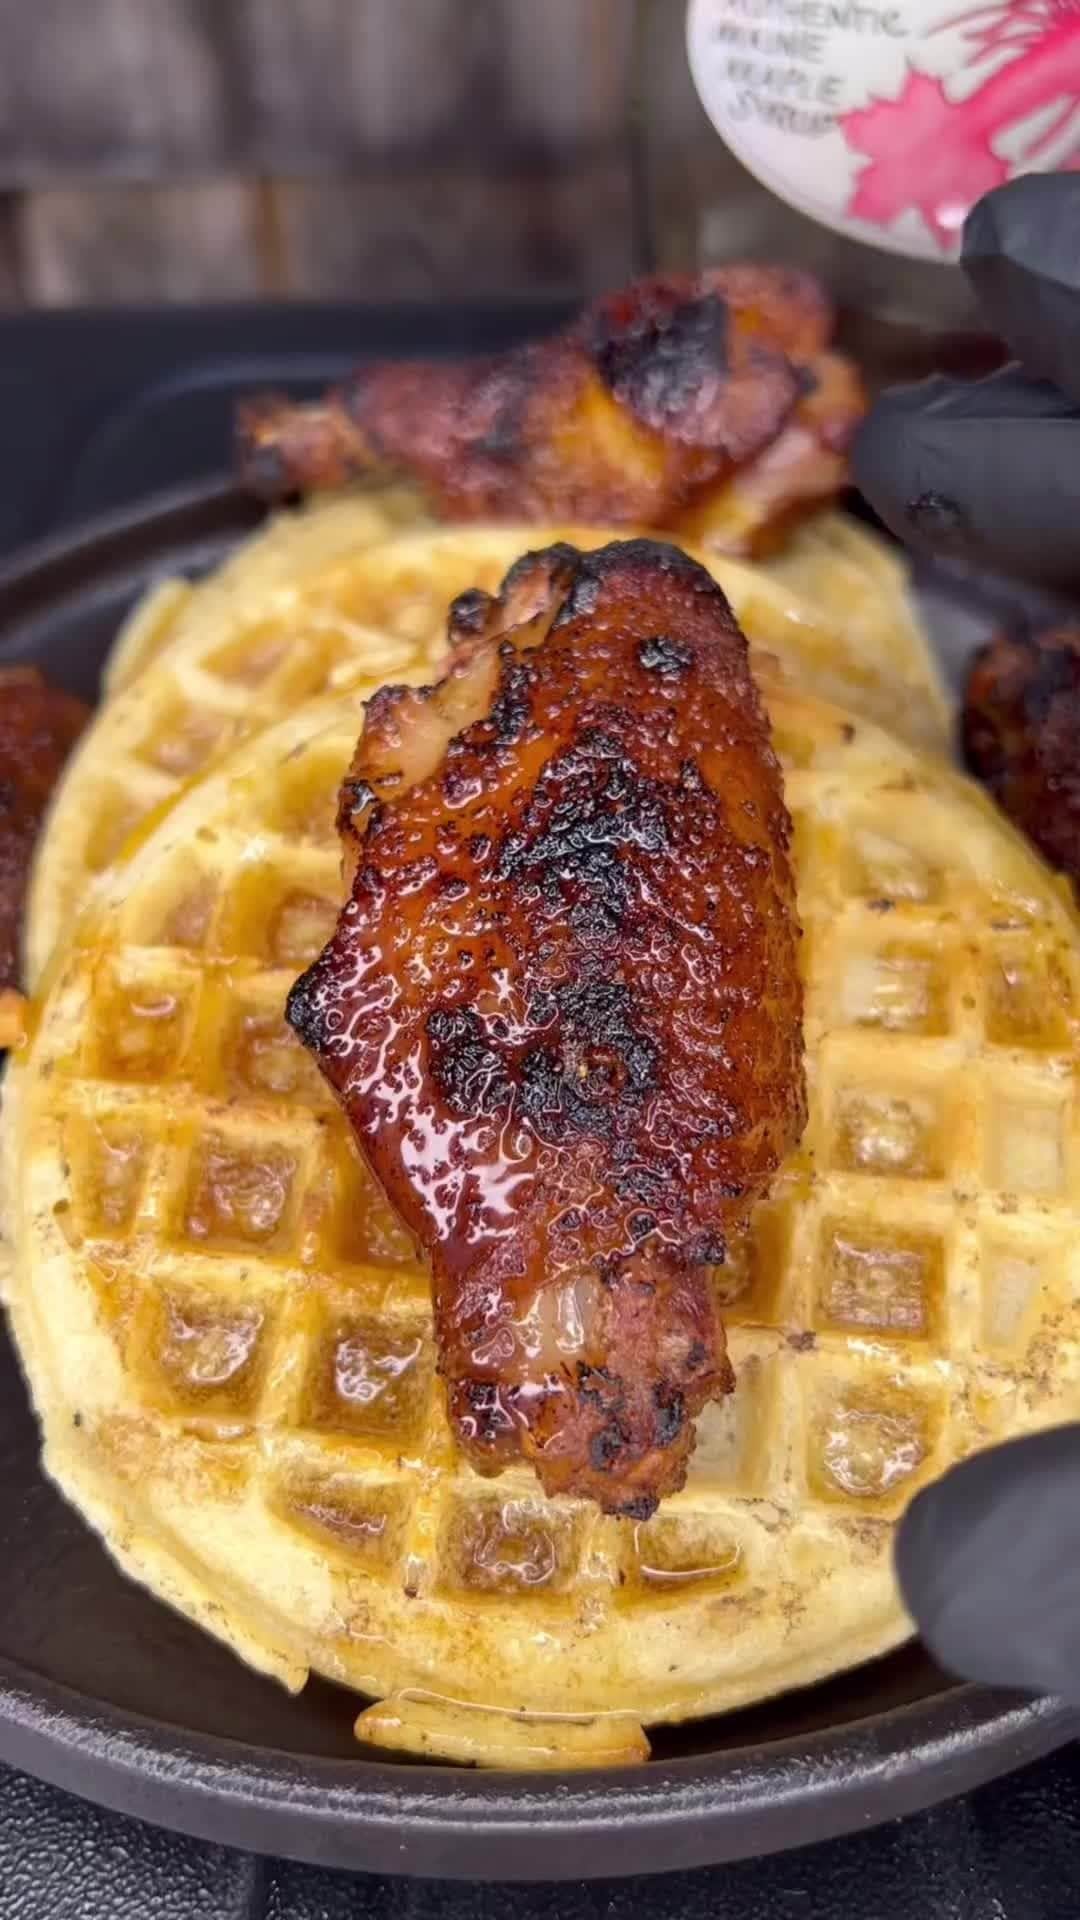 Flavorgod Seasoningsのインスタグラム：「Chicken & Waffle Wings🍗🧇 by Customer:👉 @downeasttraeger Seasoned with:👉 #Flavorgod Chicken & Waffles!🔥😎⁠ -⁠ Add delicious flavors to your meals!⬇️⁠ Click link in the bio -> @flavorgod | www.flavorgod.com⁠ -⁠ "Wings seasoned with @flavorgod chicken and waffles then smoked at 225 on the @traegergrills Ranger for 35min. Turned up to 350 for 15min and then finished off at 450 for 25min and charred on the edge where the direct heat is 🔥🔥(start timer as soon as temp is bumped)⁠ @eggo_us waffles smoked on the Ranger at 425 for about 5min 🔥⁠ Drizzled in homemade maple syrup from one of my hygienists"⁠ -⁠ Flavor God Seasonings are:⁠ ➡ZERO CALORIES PER SERVING⁠ ➡MADE FRESH⁠ ➡MADE LOCALLY IN US⁠ ➡FREE GIFTS AT CHECKOUT⁠ ➡GLUTEN FREE⁠ ➡#PALEO & #KETO FRIENDLY⁠ -⁠ #breakfast #fitness #food #foodporn #foodie #instafood #foodphotography #foodstagram #yummy #instagood  #foodies #tasty #cooking #instadaily #lunch #healthy #seasonings #flavorgod #lowsodium #glutenfree #dairyfree」